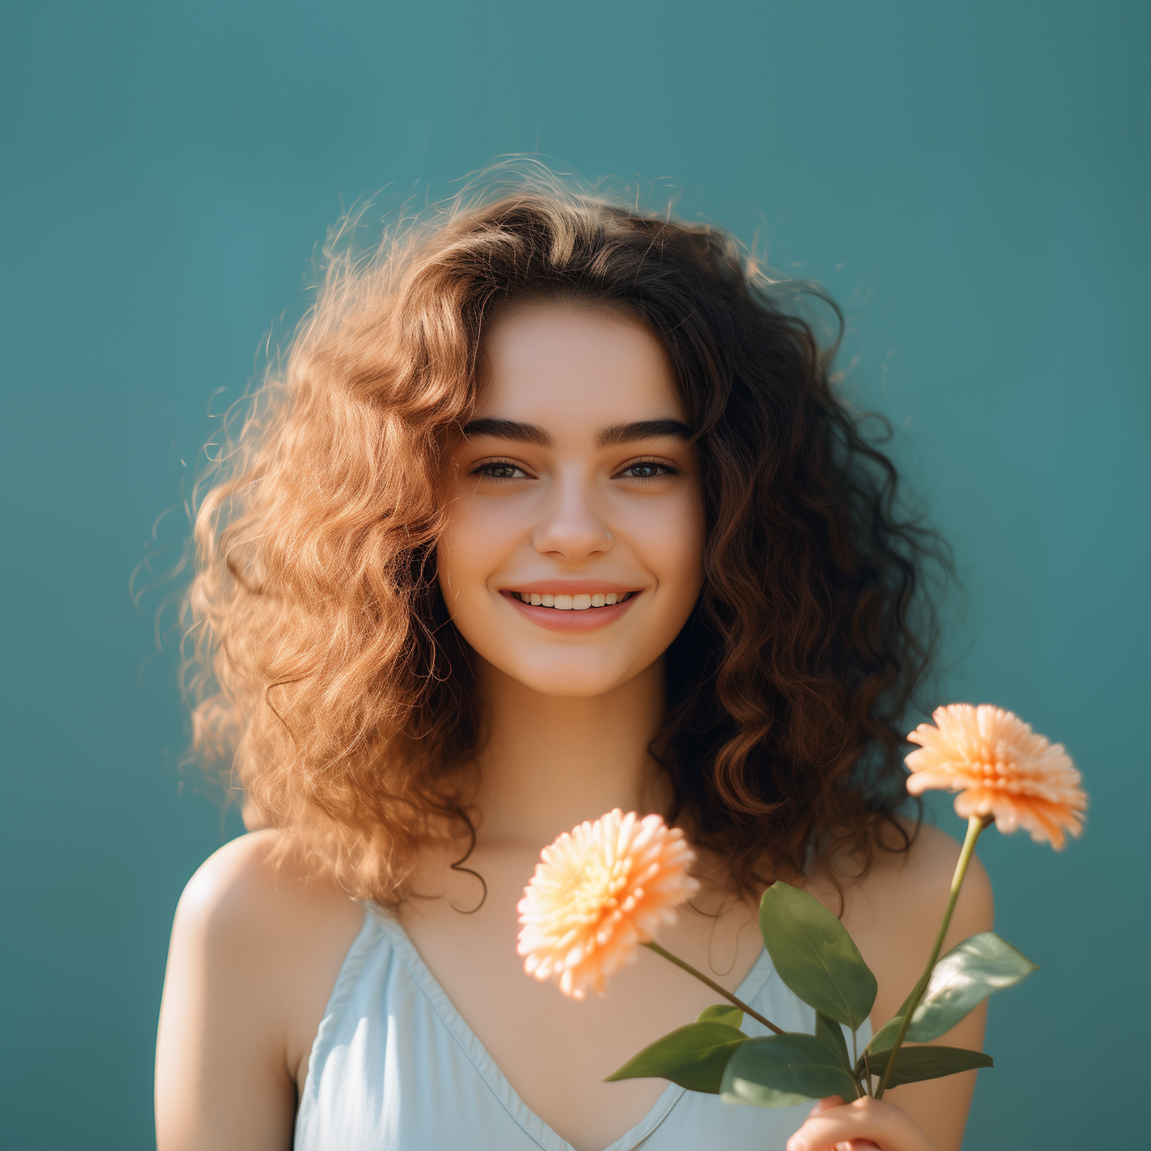 a woman with curly hair is holding a flower in her hand and smiling .